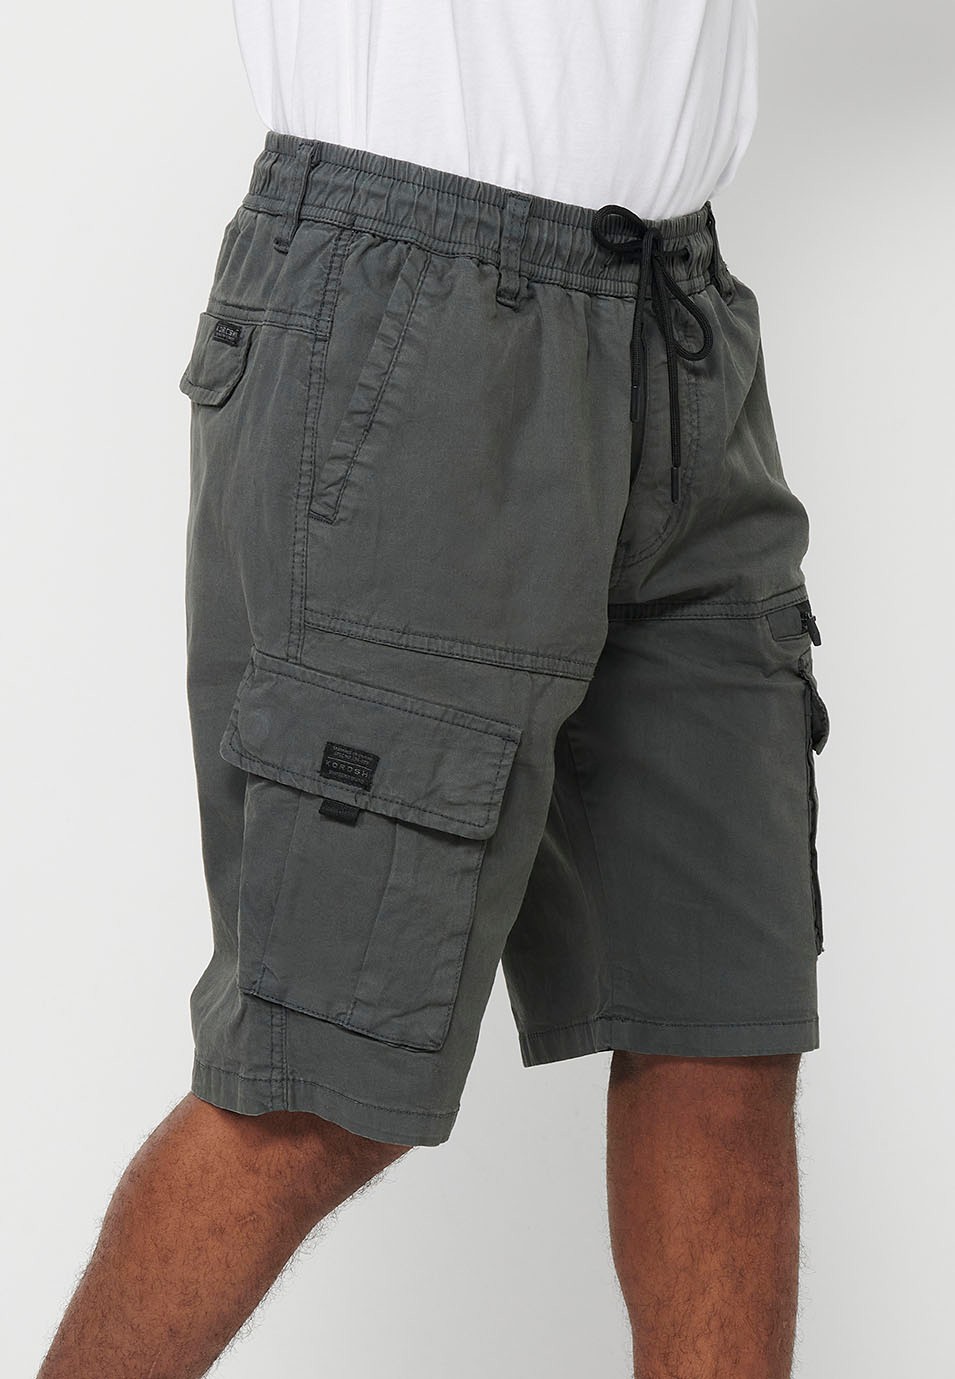 Cargo shorts with side pockets with flap and front closure with zipper and button Color Gray for Men 3